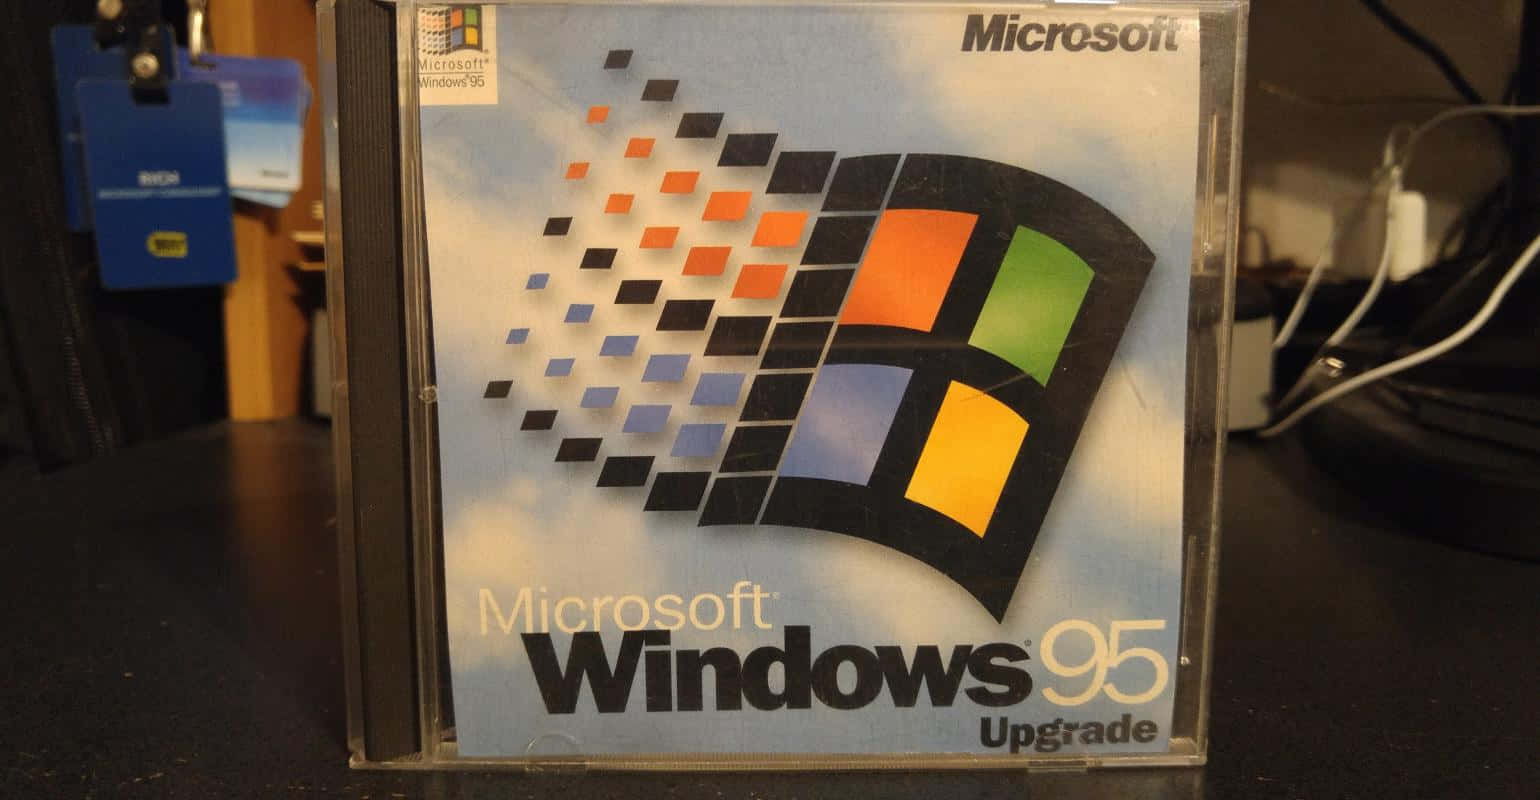 The iconic launch of Windows 95